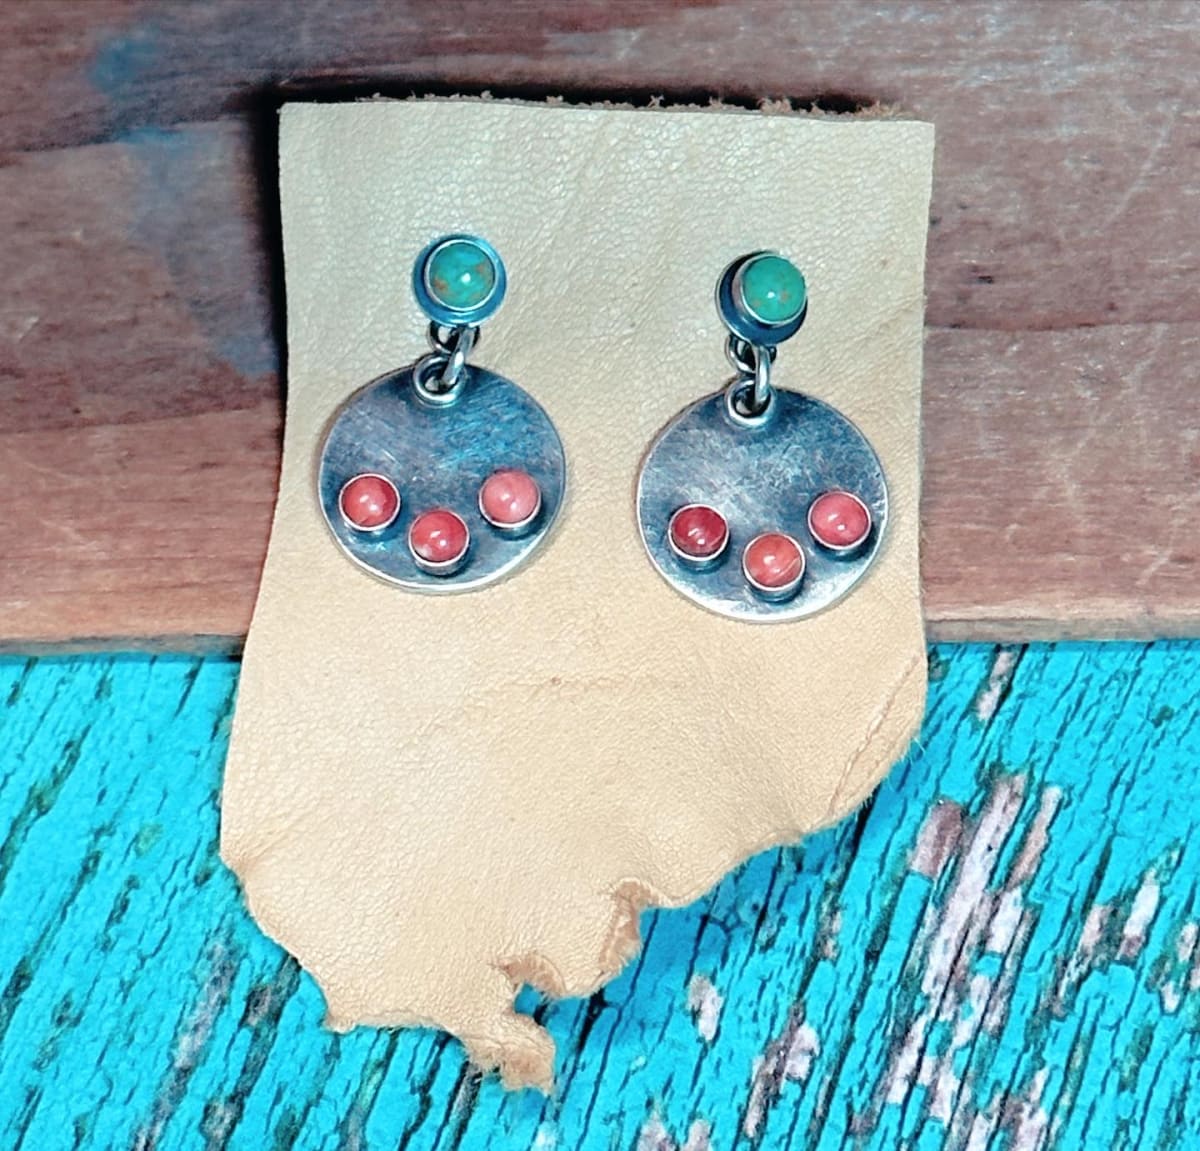 "Christmas Sauce Luna Earrings" - Sterling Silver, Spiney Oyster, and Kingman Turquoise Posts, Smooth Bezels by Shasta Brooks  Image: All Art © Shasta Brooks Studio LLC